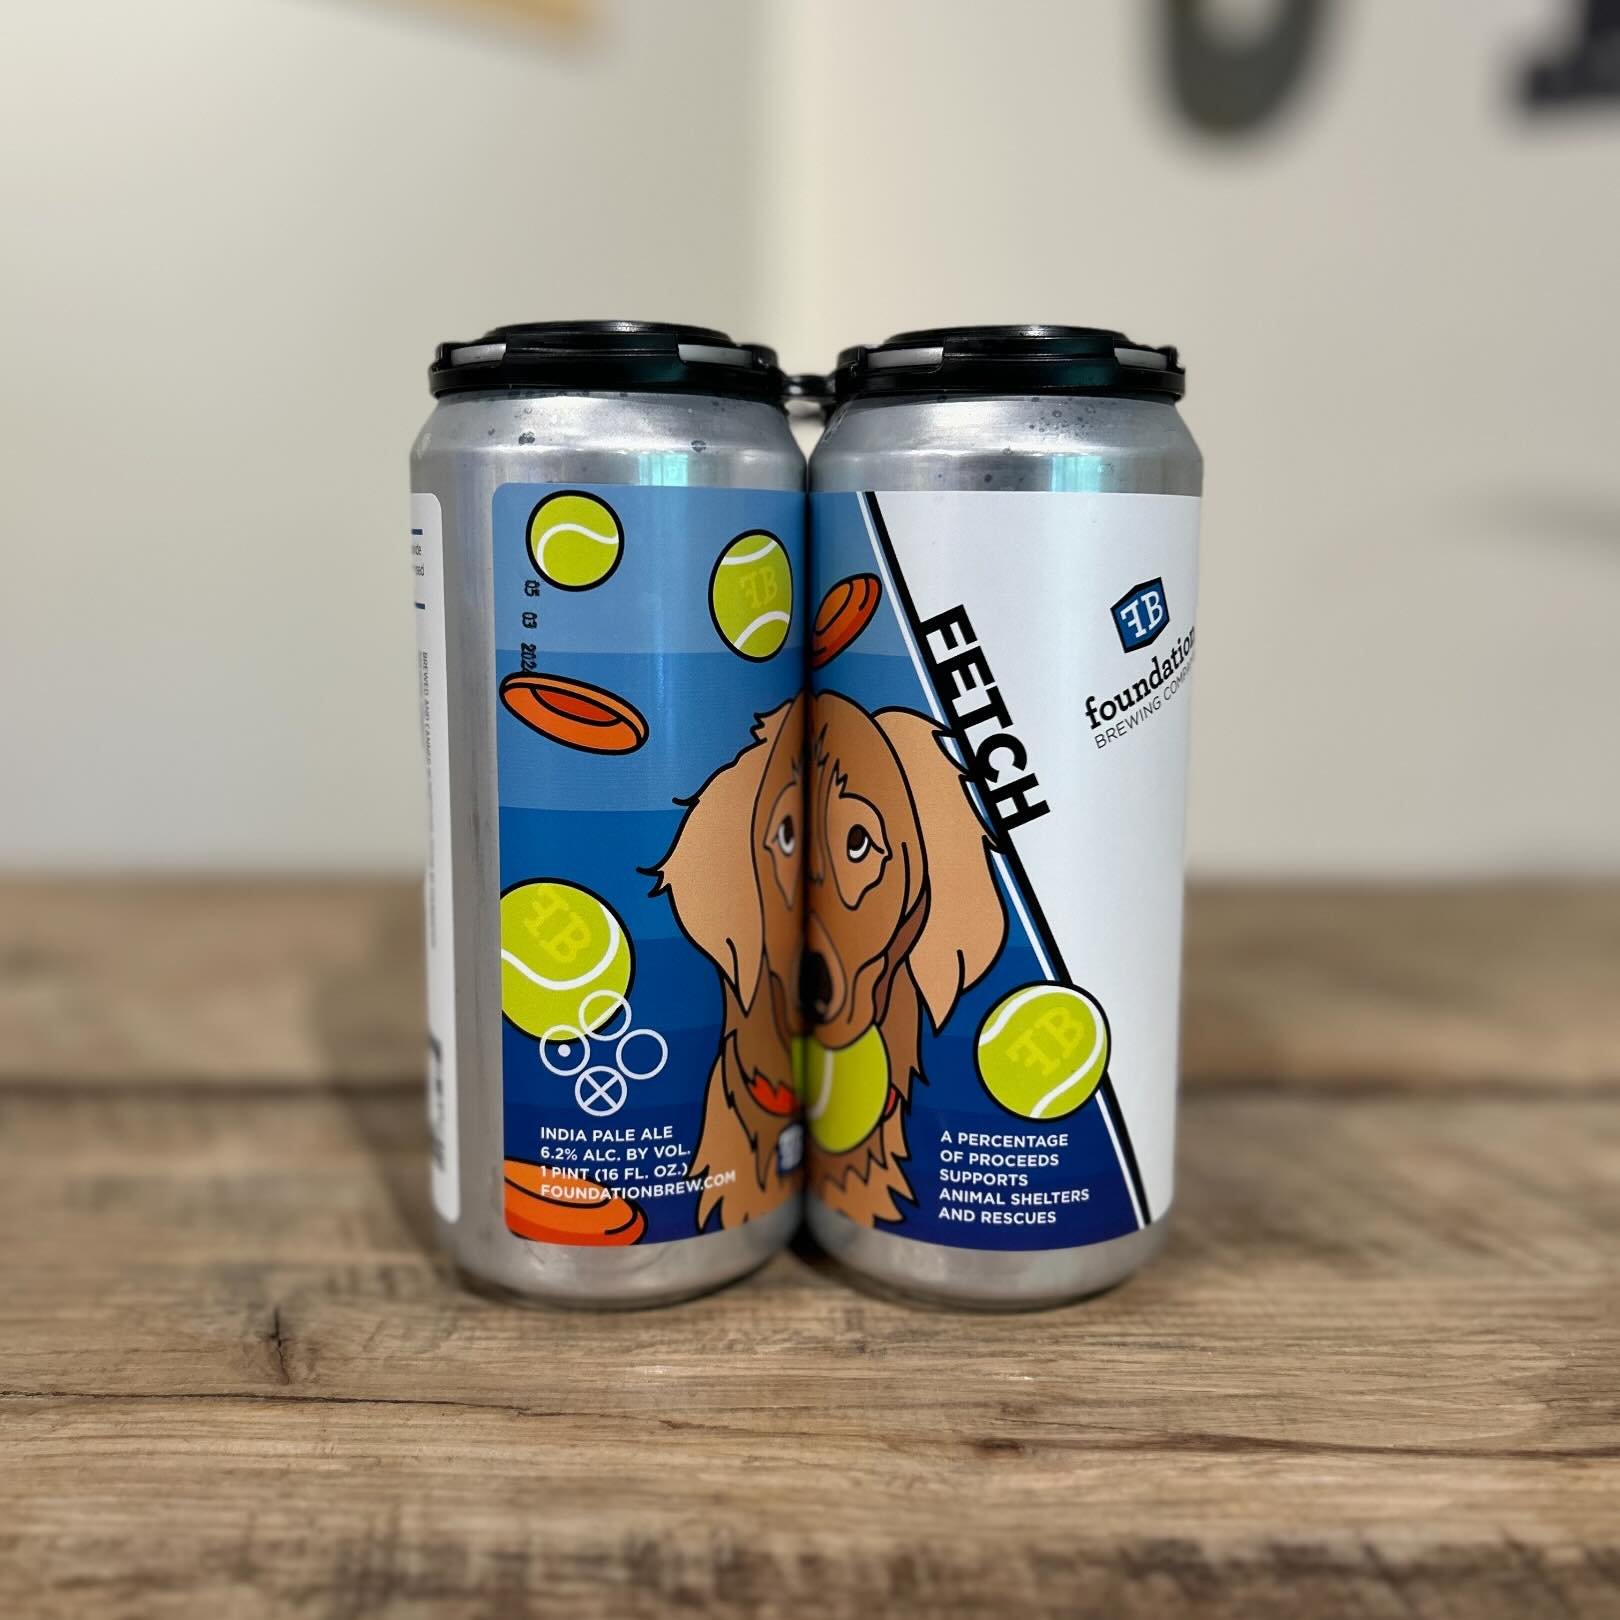 New from @foundationbrew #NowAvailable #SudburyCraftBeer #TheSuds
&mdash;
FETCH

We are very excited about this new addition to our year-round portfolio. A super juicy, hazy IPA at an approachable 6.2%. Full of citrus and tropical fruit flavors from 